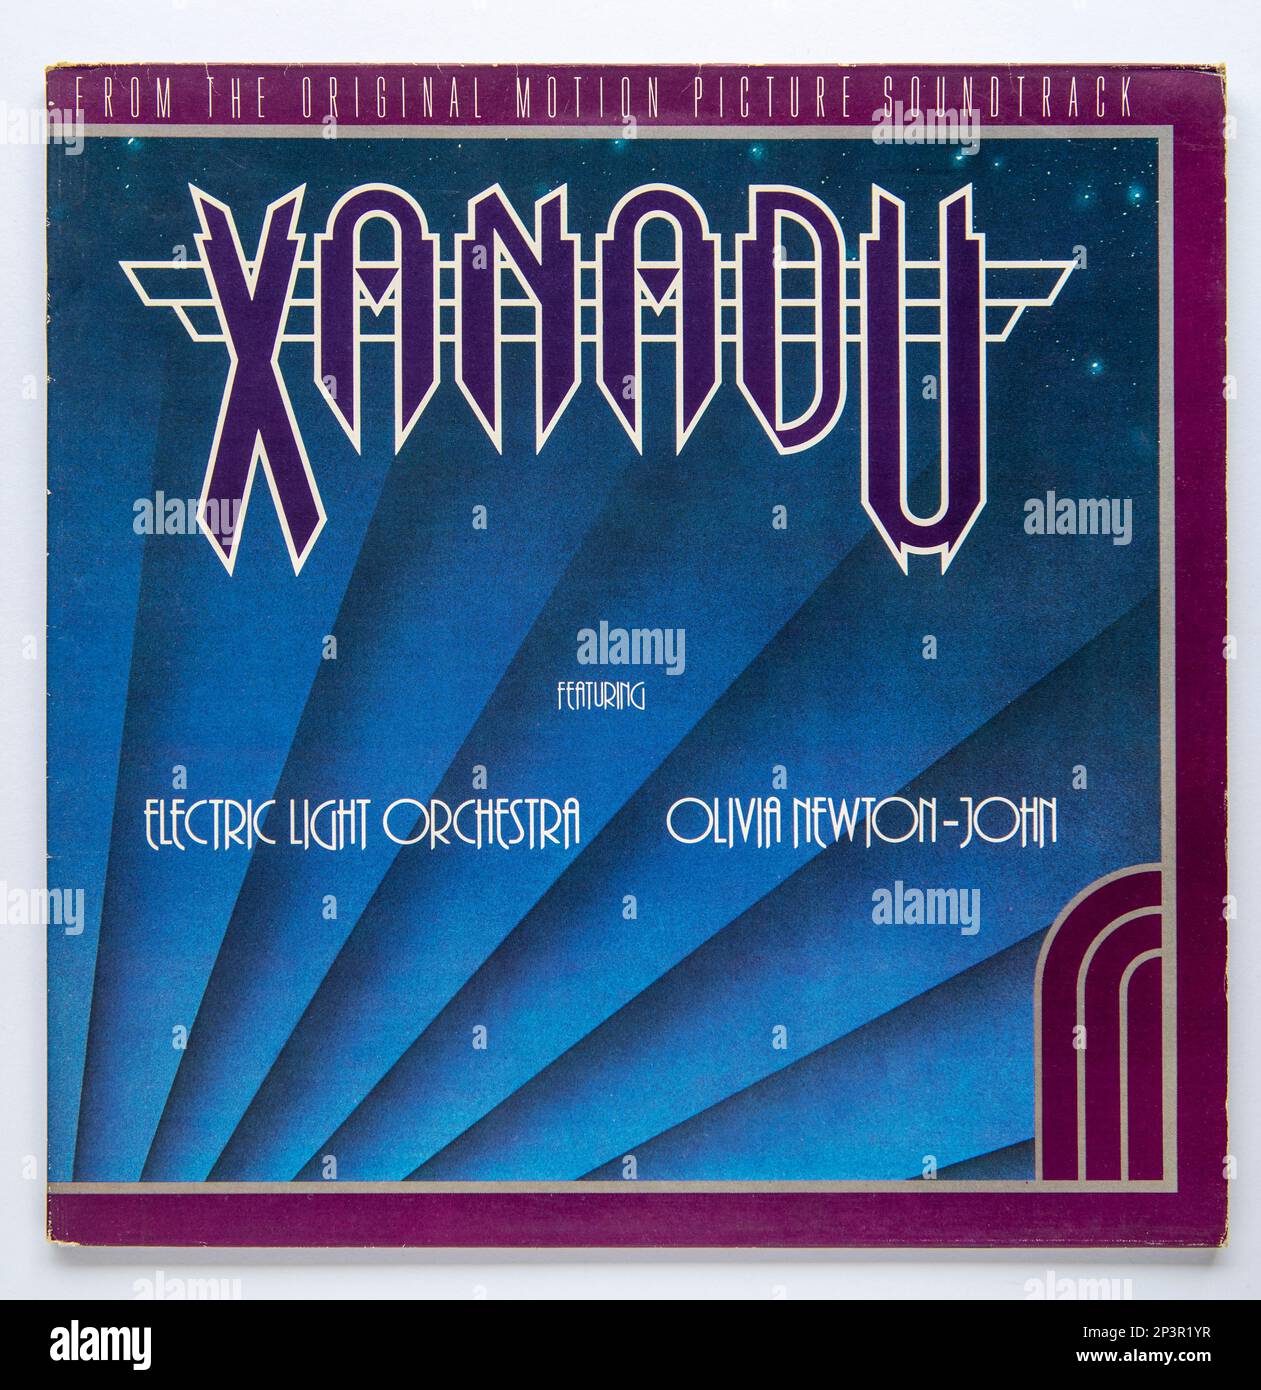 LP cover of the Xanadu soundtrack album by the Electric Light Orchestra and Olivia Newton-John, which was released in 1980. Stock Photo